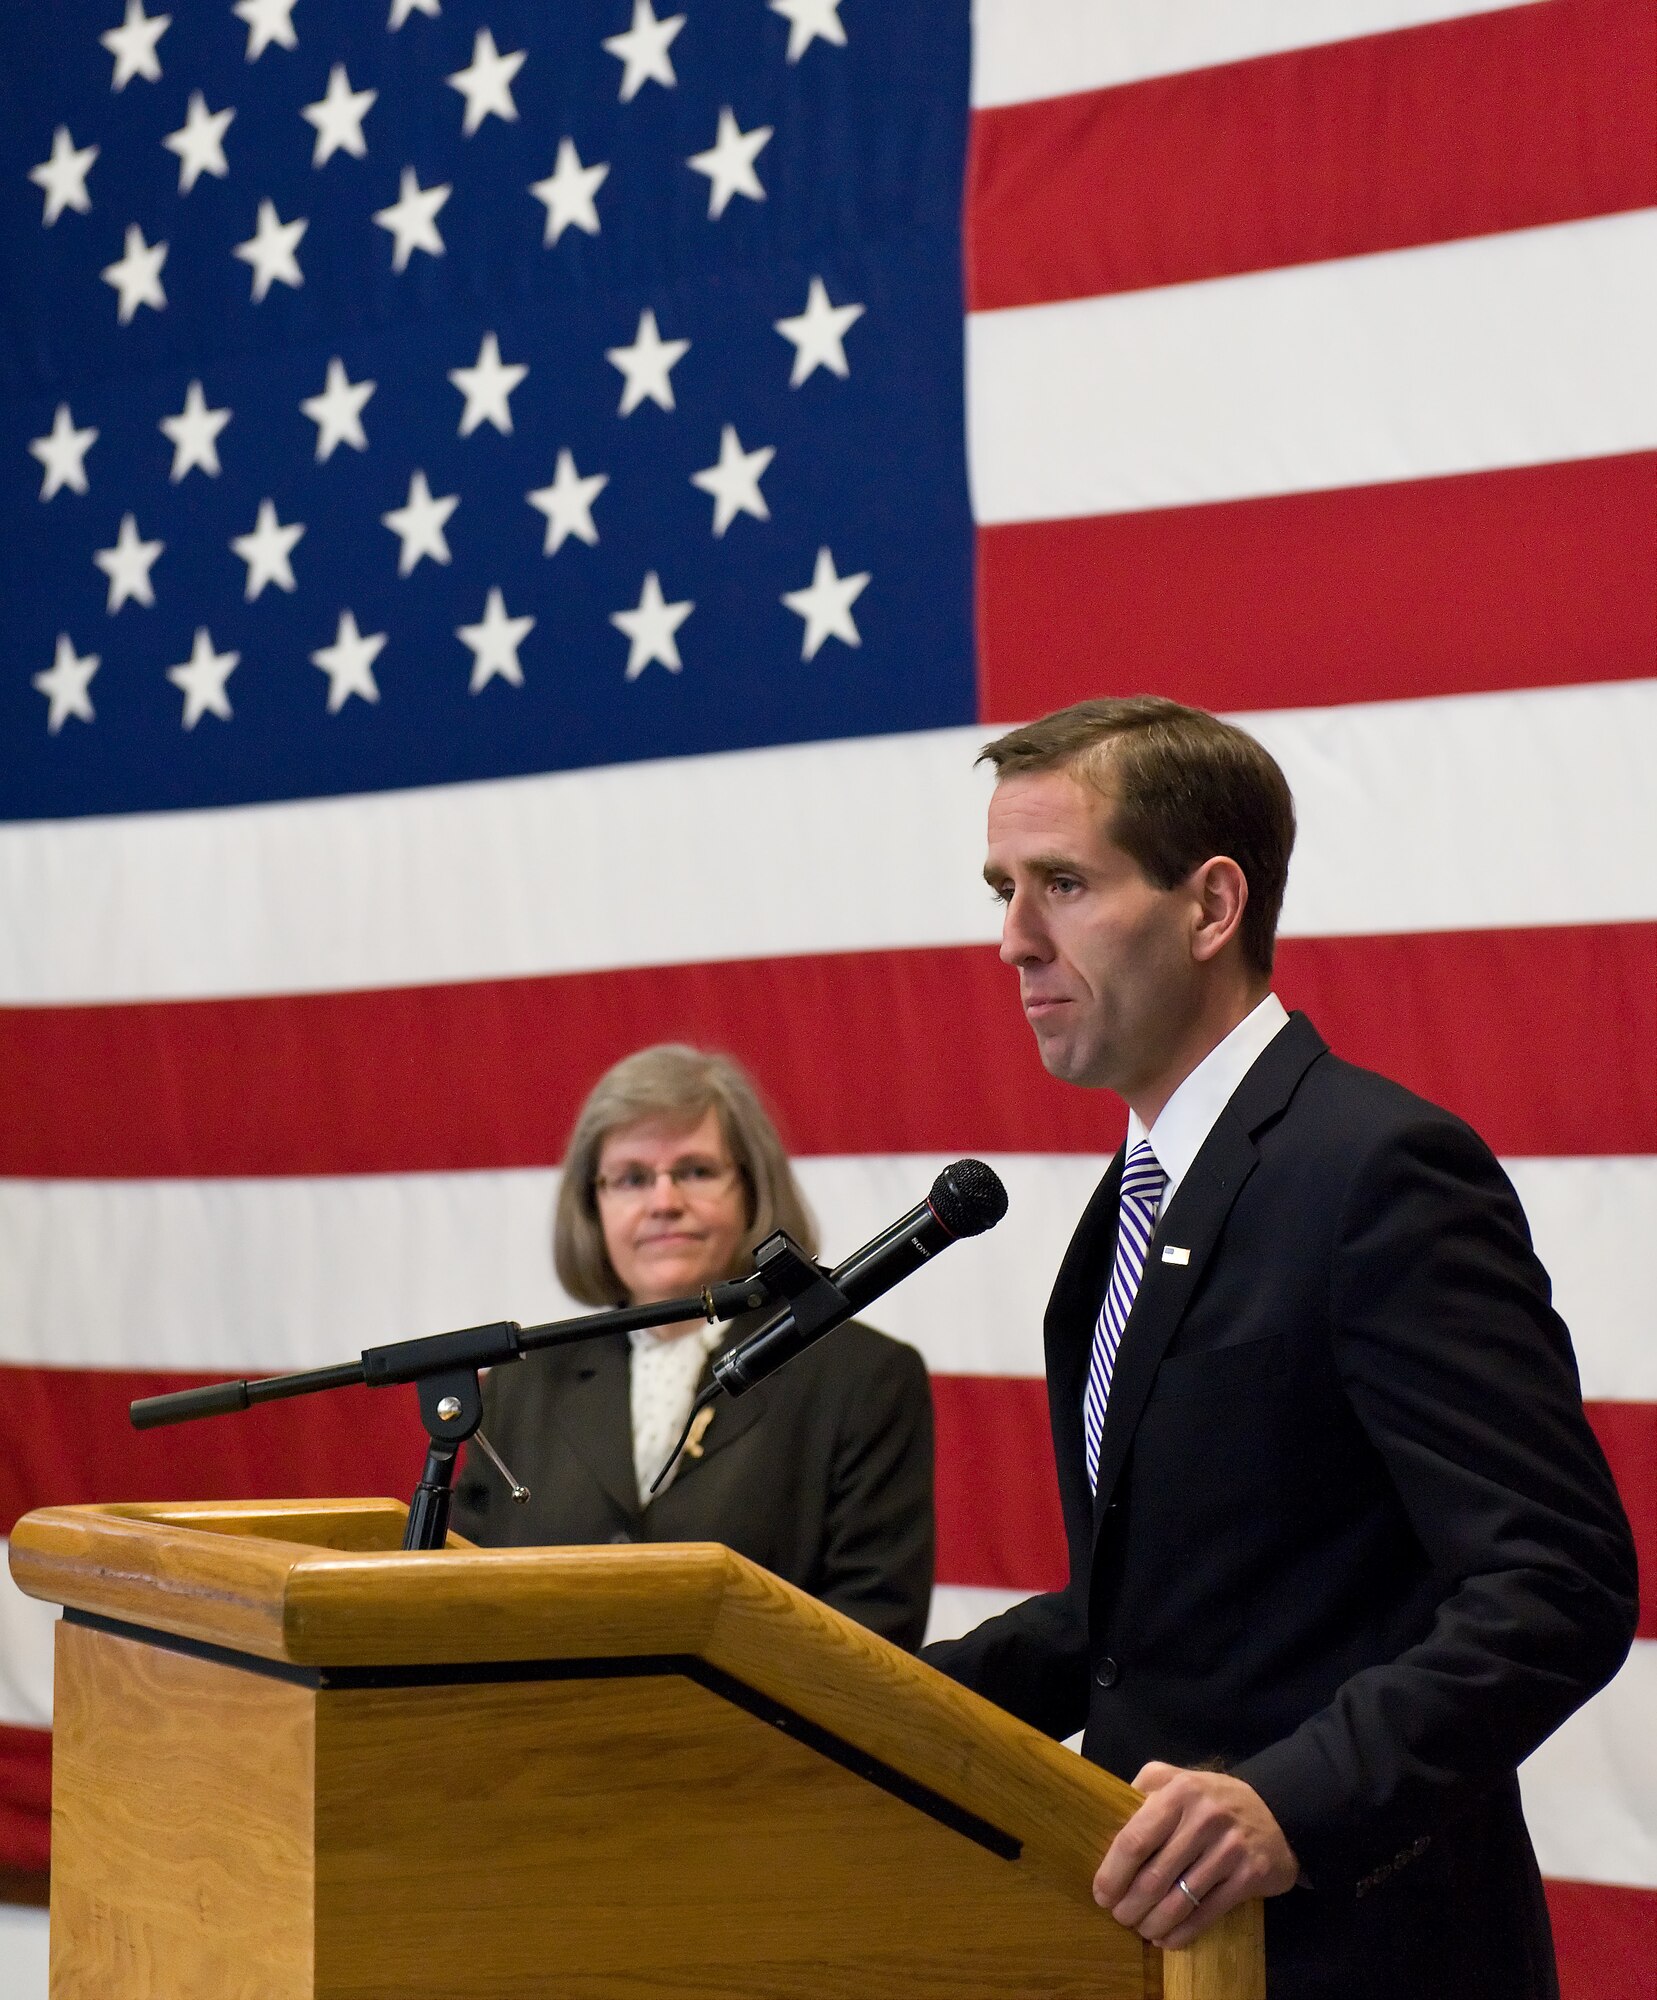 Delaware Attorney General Beau Biden, right, stands with Holly Petraeus, director of the Consumer Financial Protection Bureau’s Office of Servicemember Affairs, at a press conference Jan. 20, 2012, at The Landings Club at Dover Air Force Base, Del. They also met with base leadership during a round table dialogue and hosted a town hall meeting with Airmen from Dover AFB to discuss issues including housing, for-profit schools, used car lots, loans, debt collection and the Servicemembers Civil Relief Act. (U.S. Air Force photo by Roland Balik)